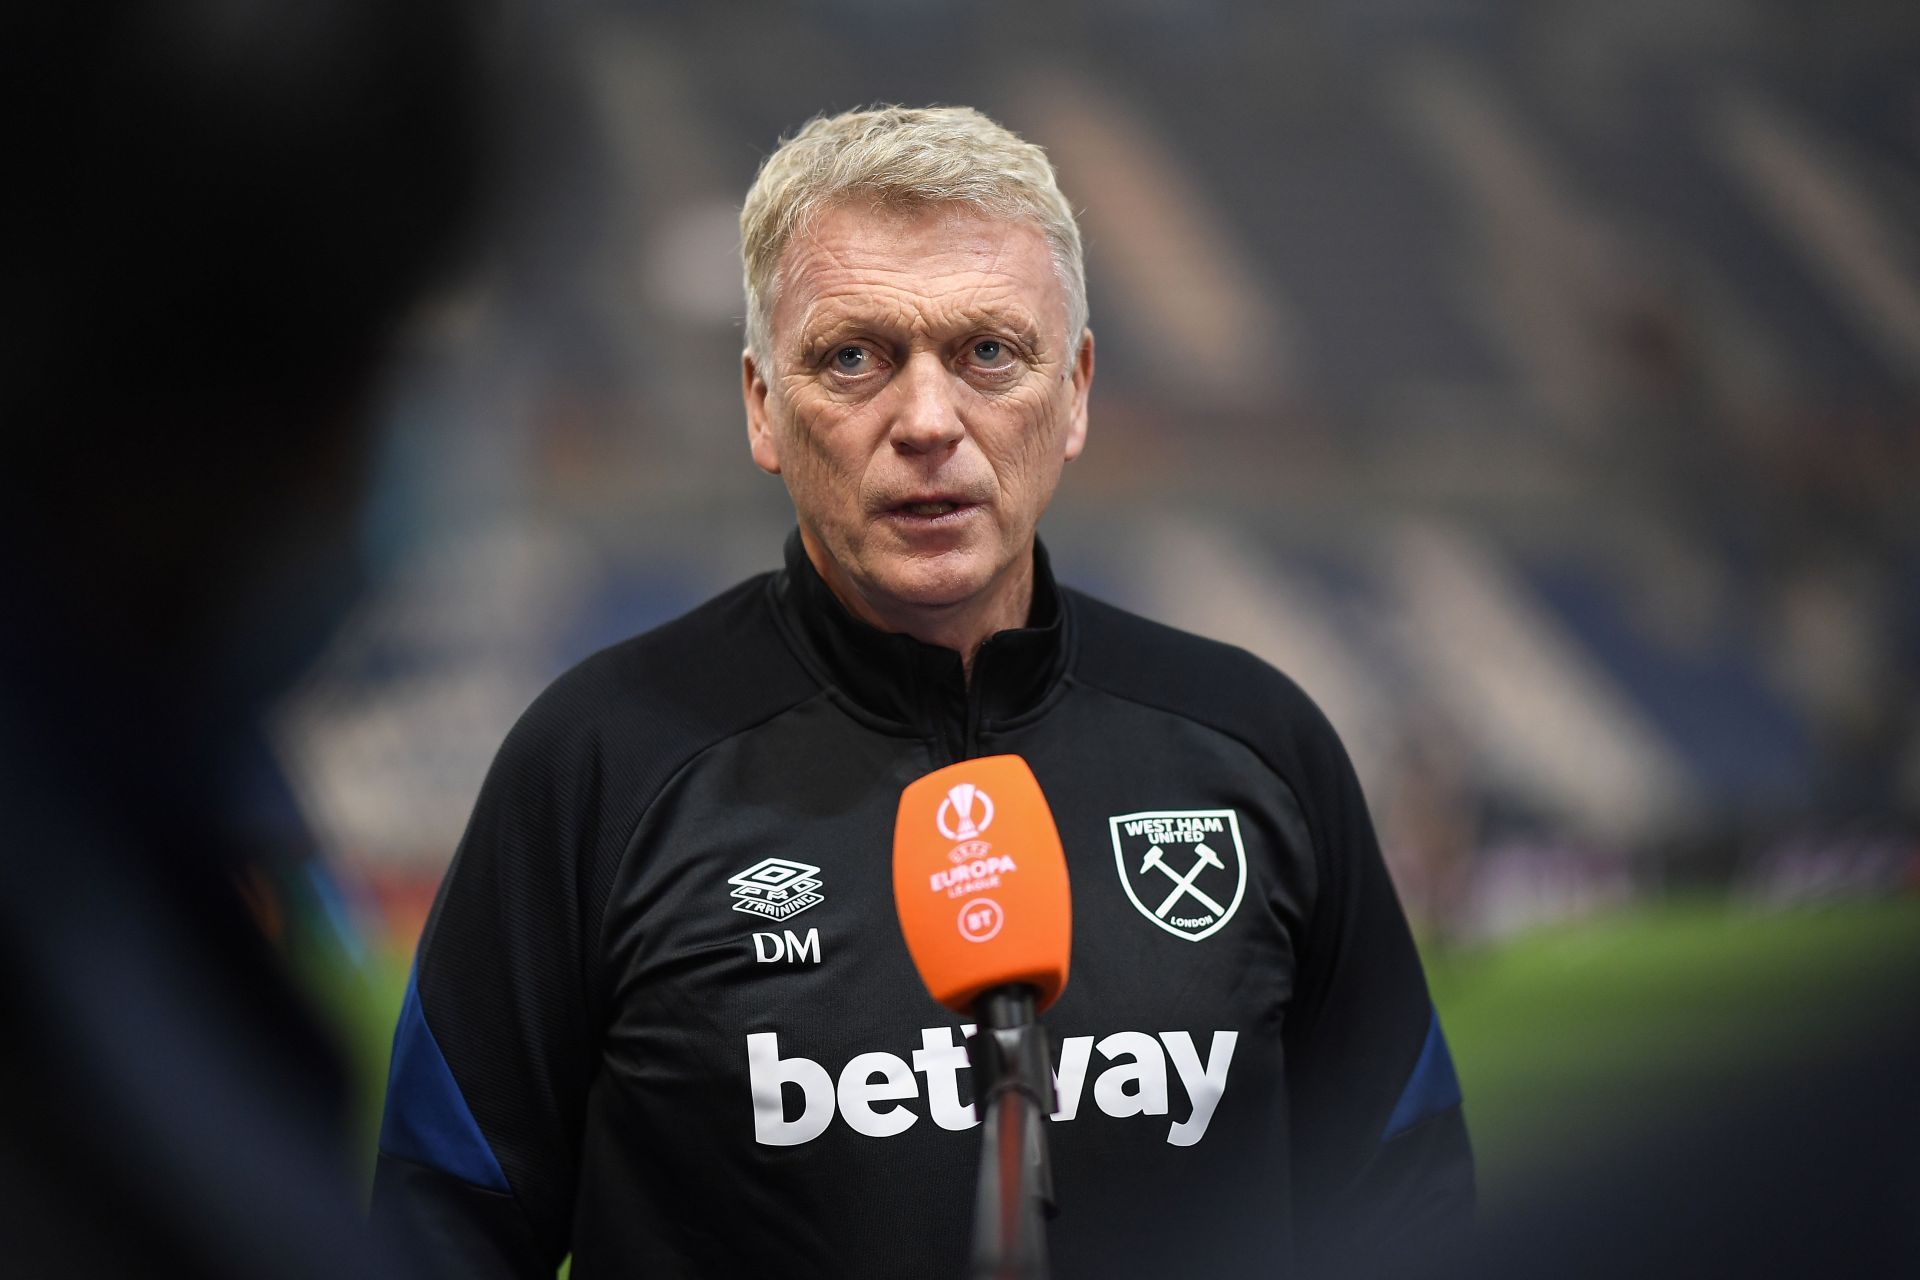 David Moyes is the current West Ham United manager/